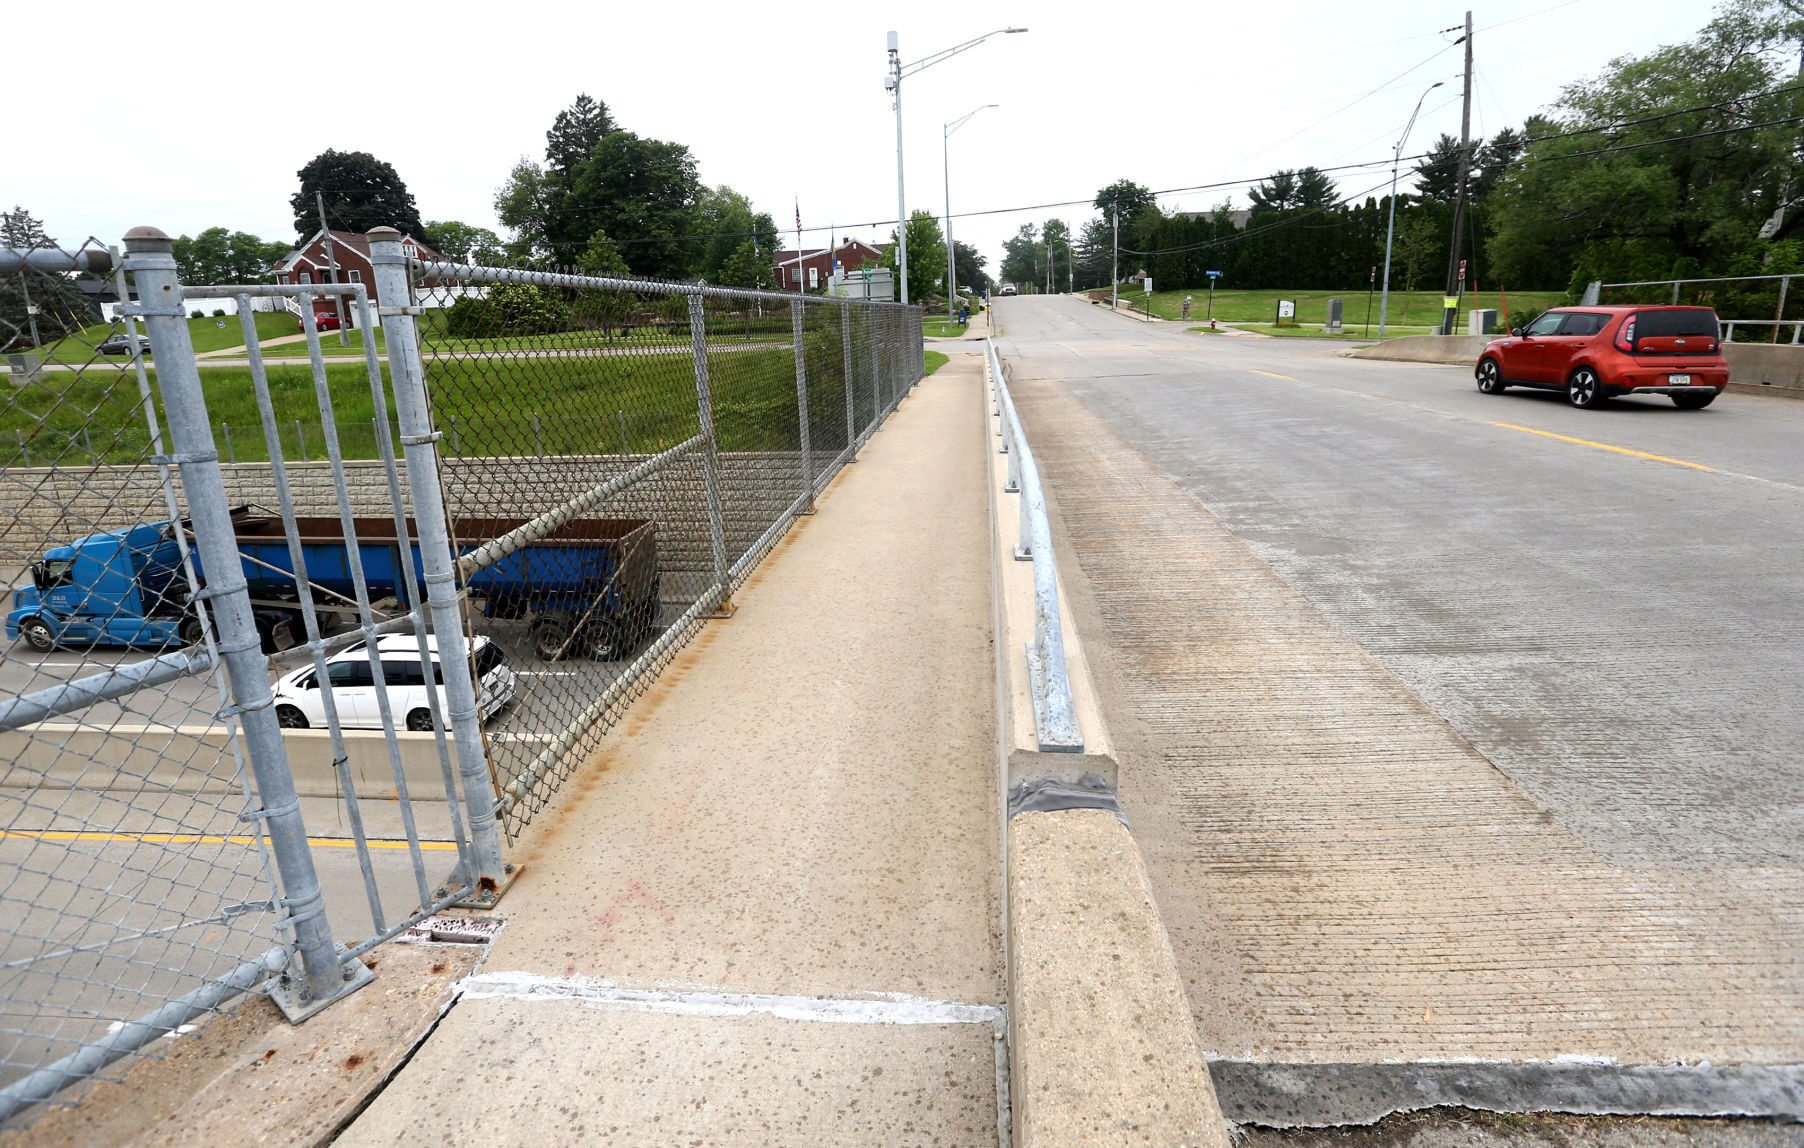 Traffic moves over a bridge on South Grandview Avenue in Dubuque on Friday, June 10, 2022. The bridge is slated to be replaced as part of the Iowa Department of Transportation